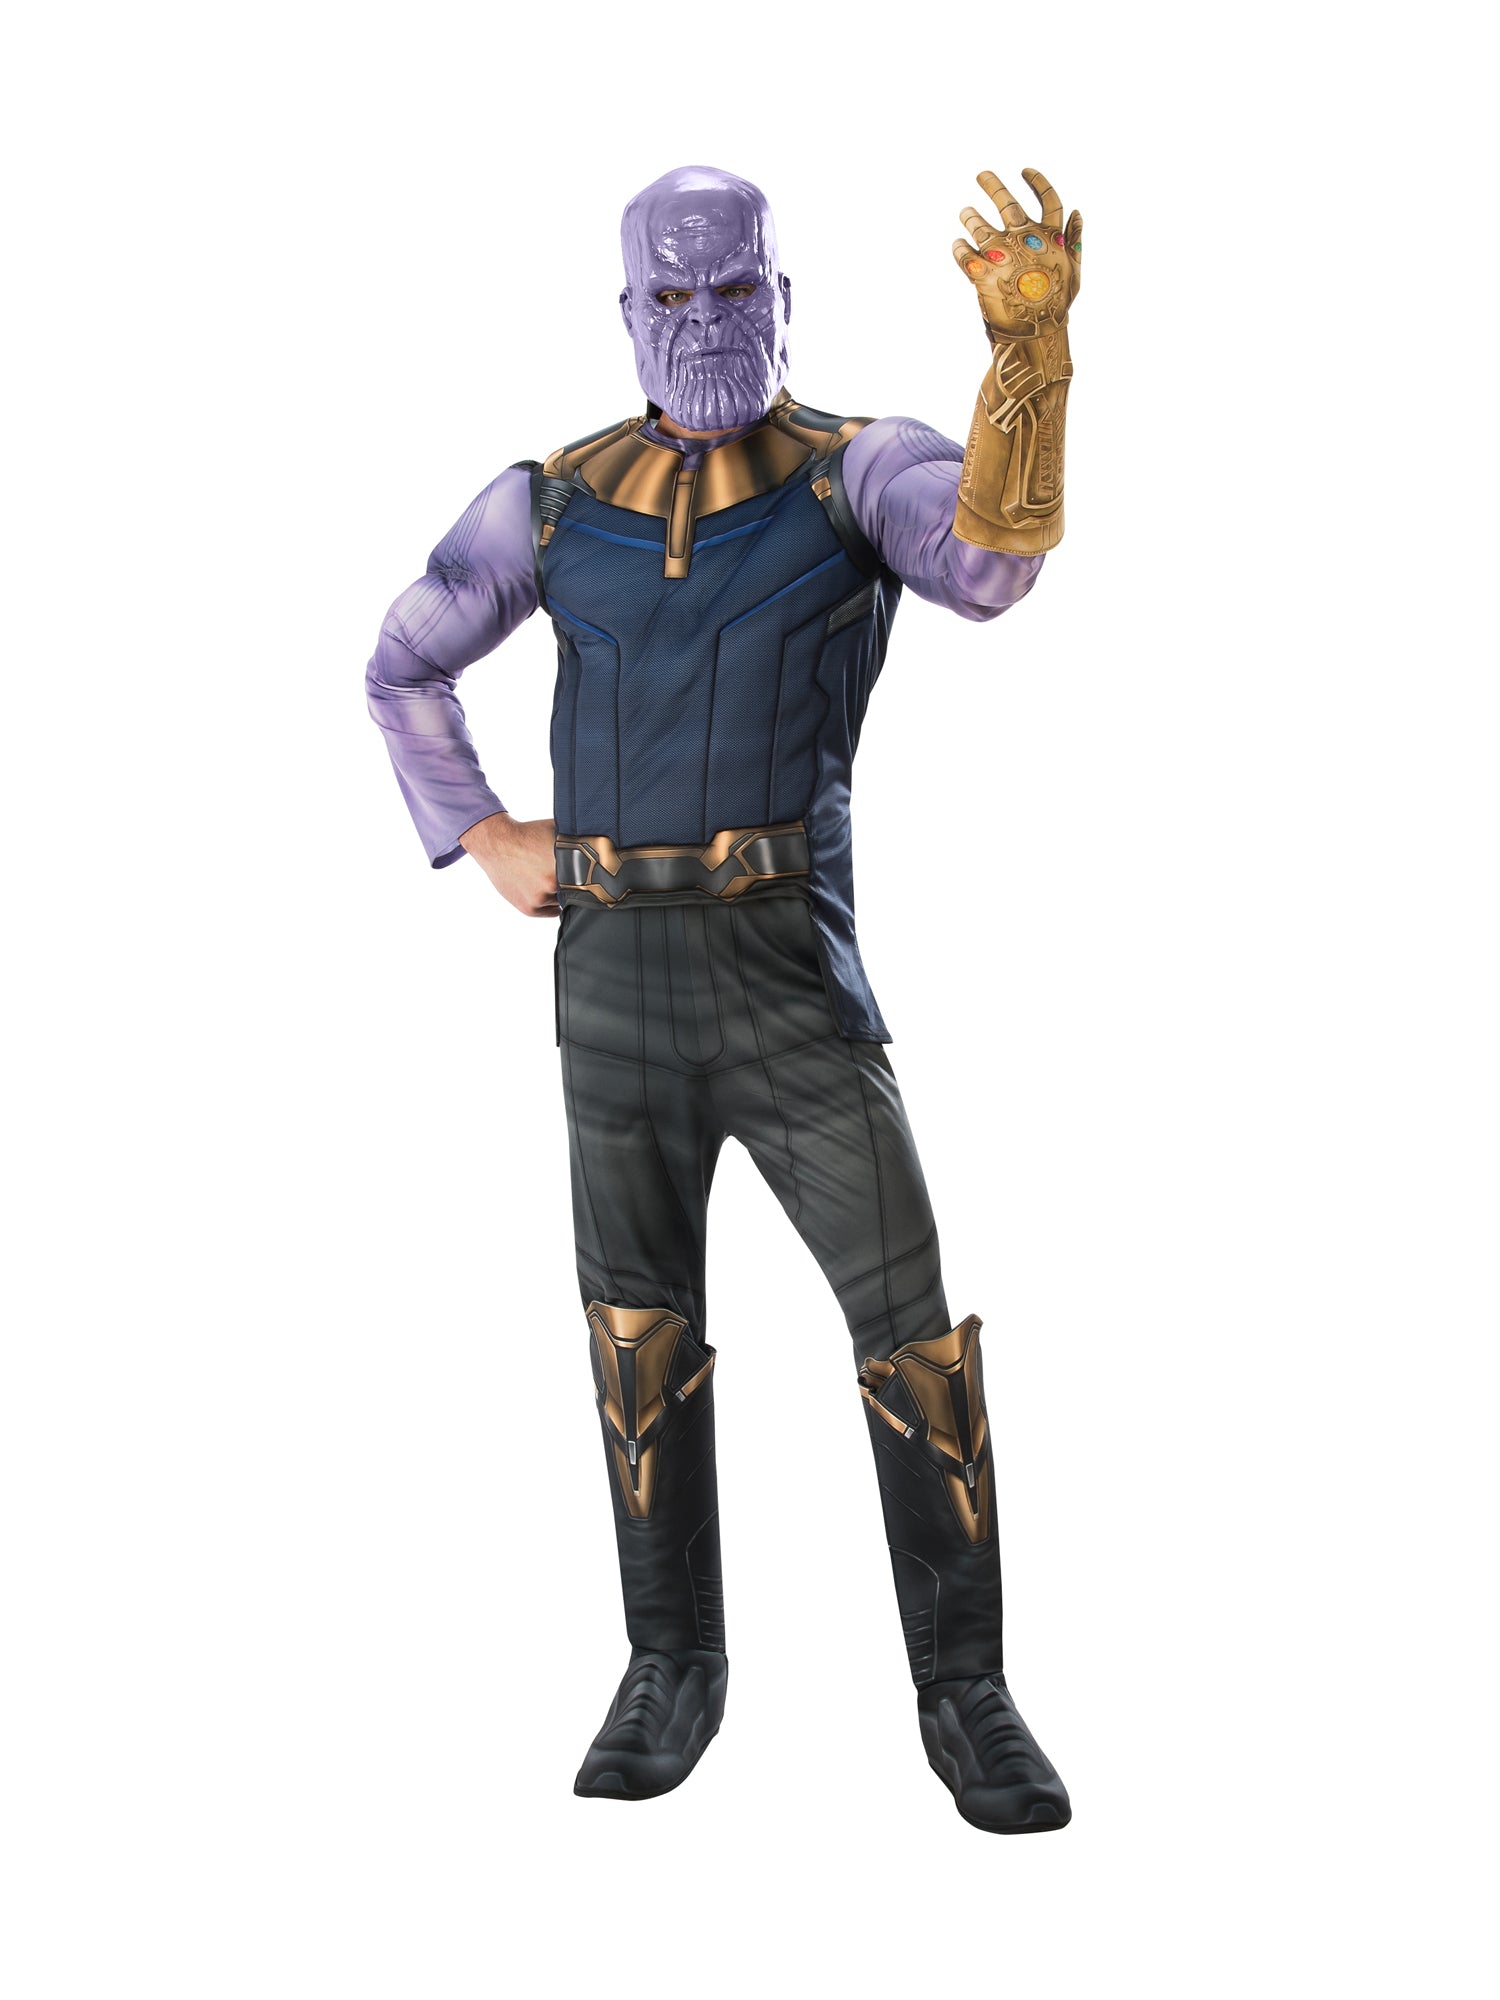 Thanos, Infinity War, Avengers, Infinity War, Multi, Marvel, Adult Costume, Extra Large, Front